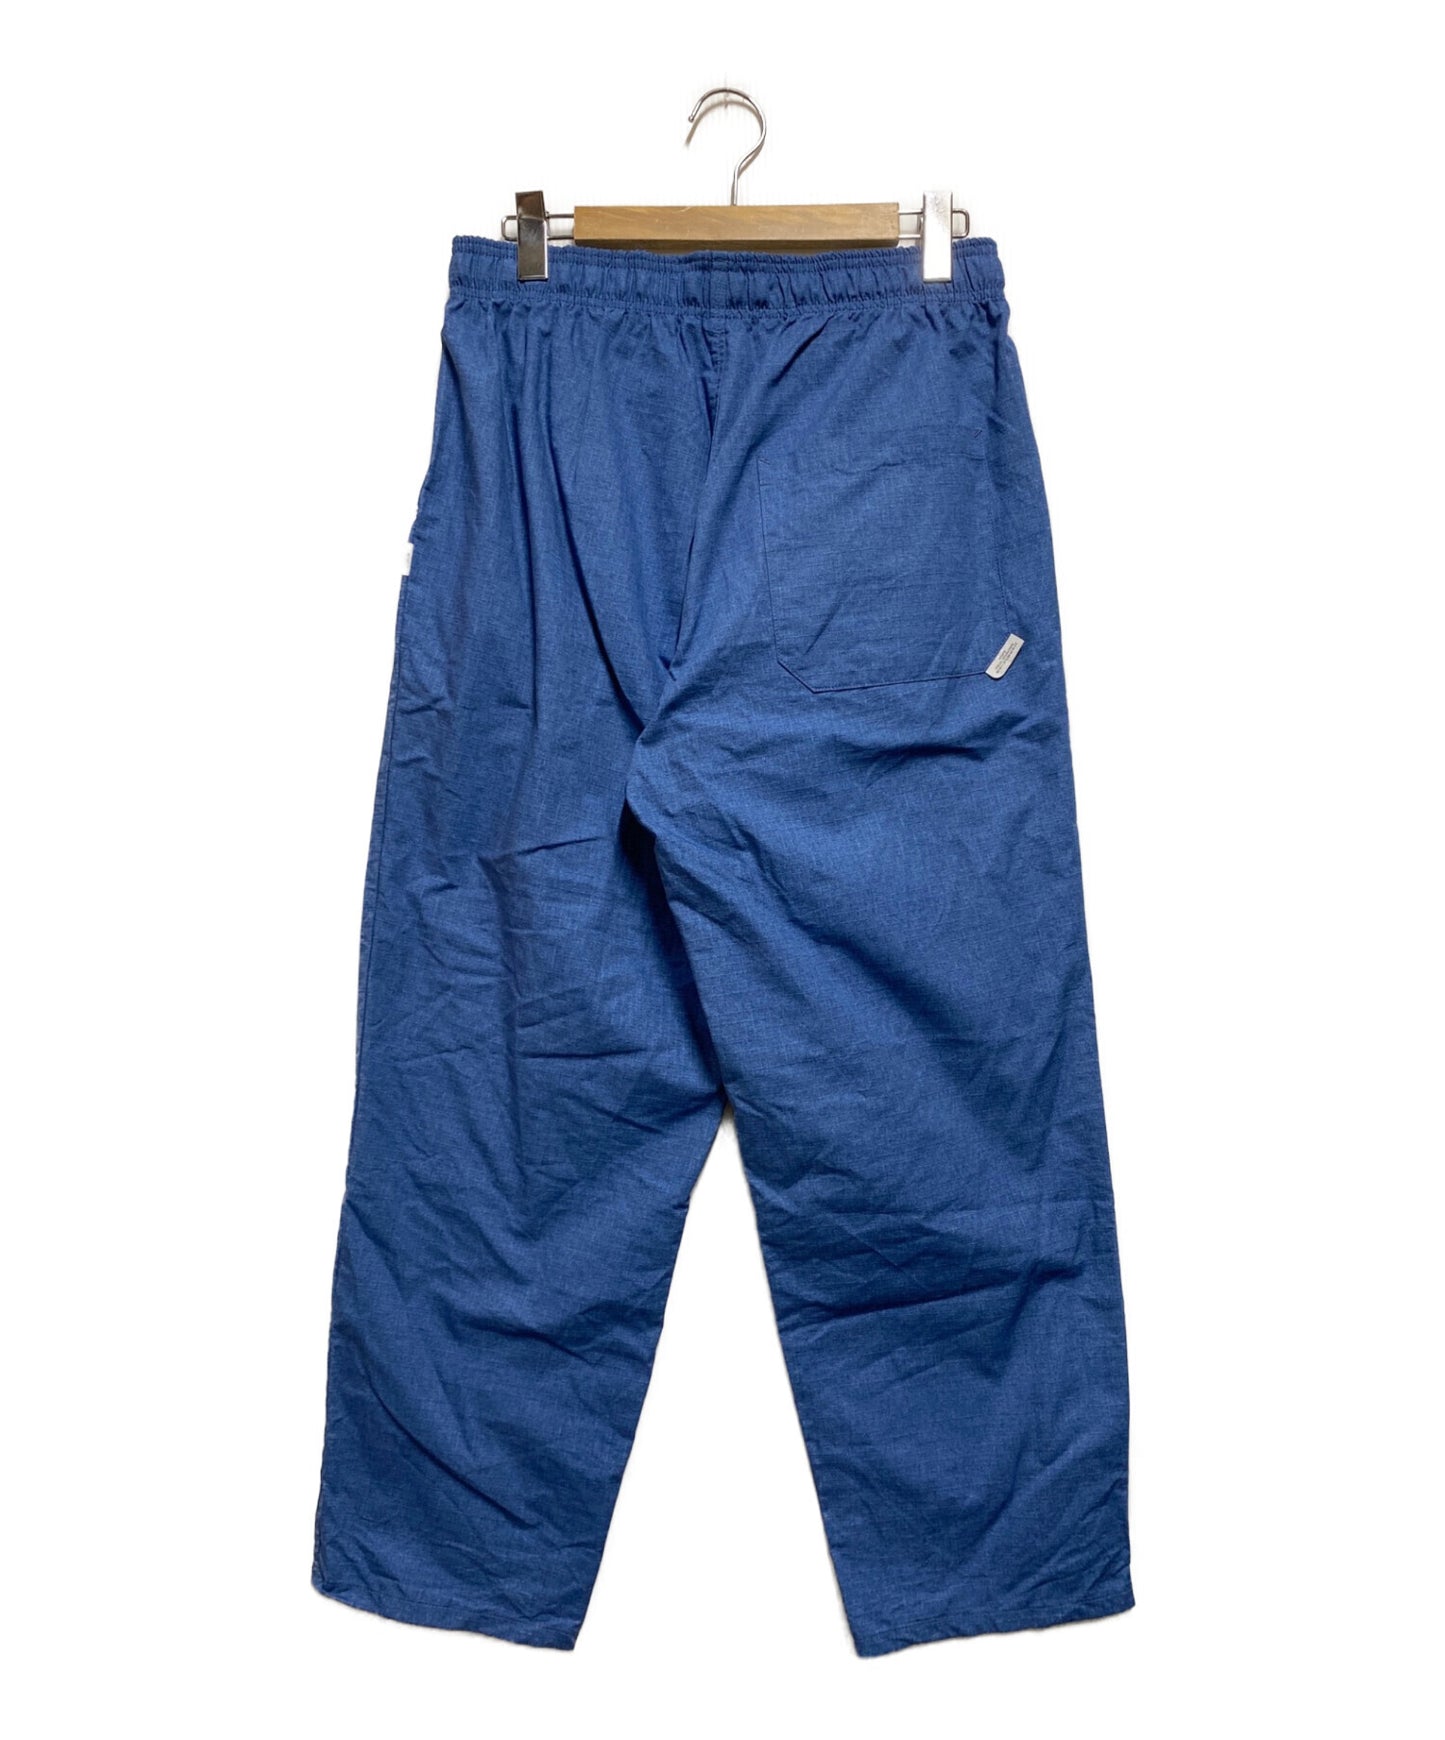 WTAPS 23Aw Rousers / Cotton RIPSTOP 231BRDT-PTM04